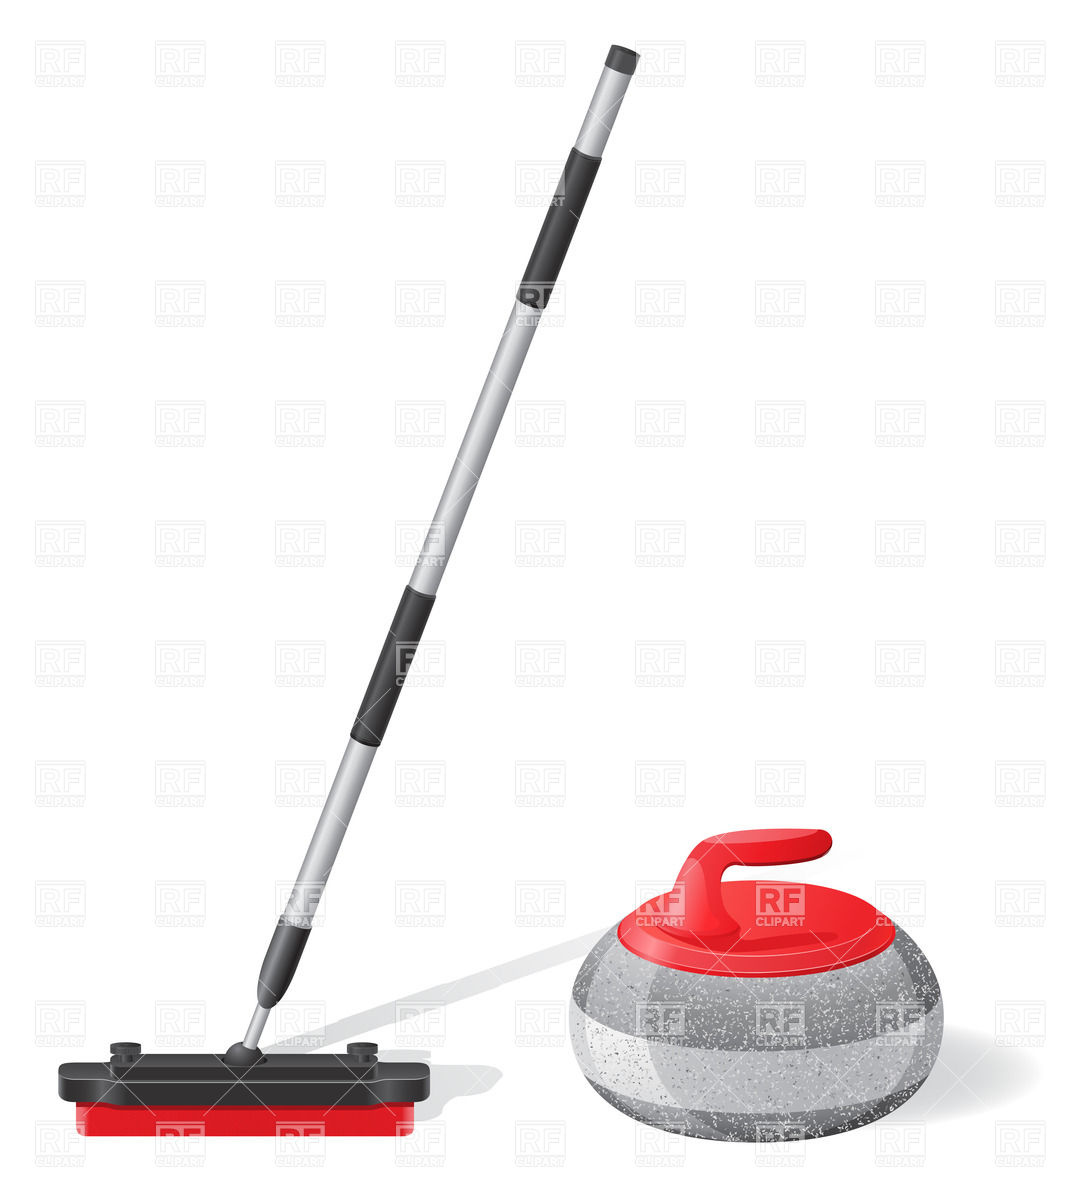 Curling Broom And Stone For Sport Game Download Royalty Free Vector